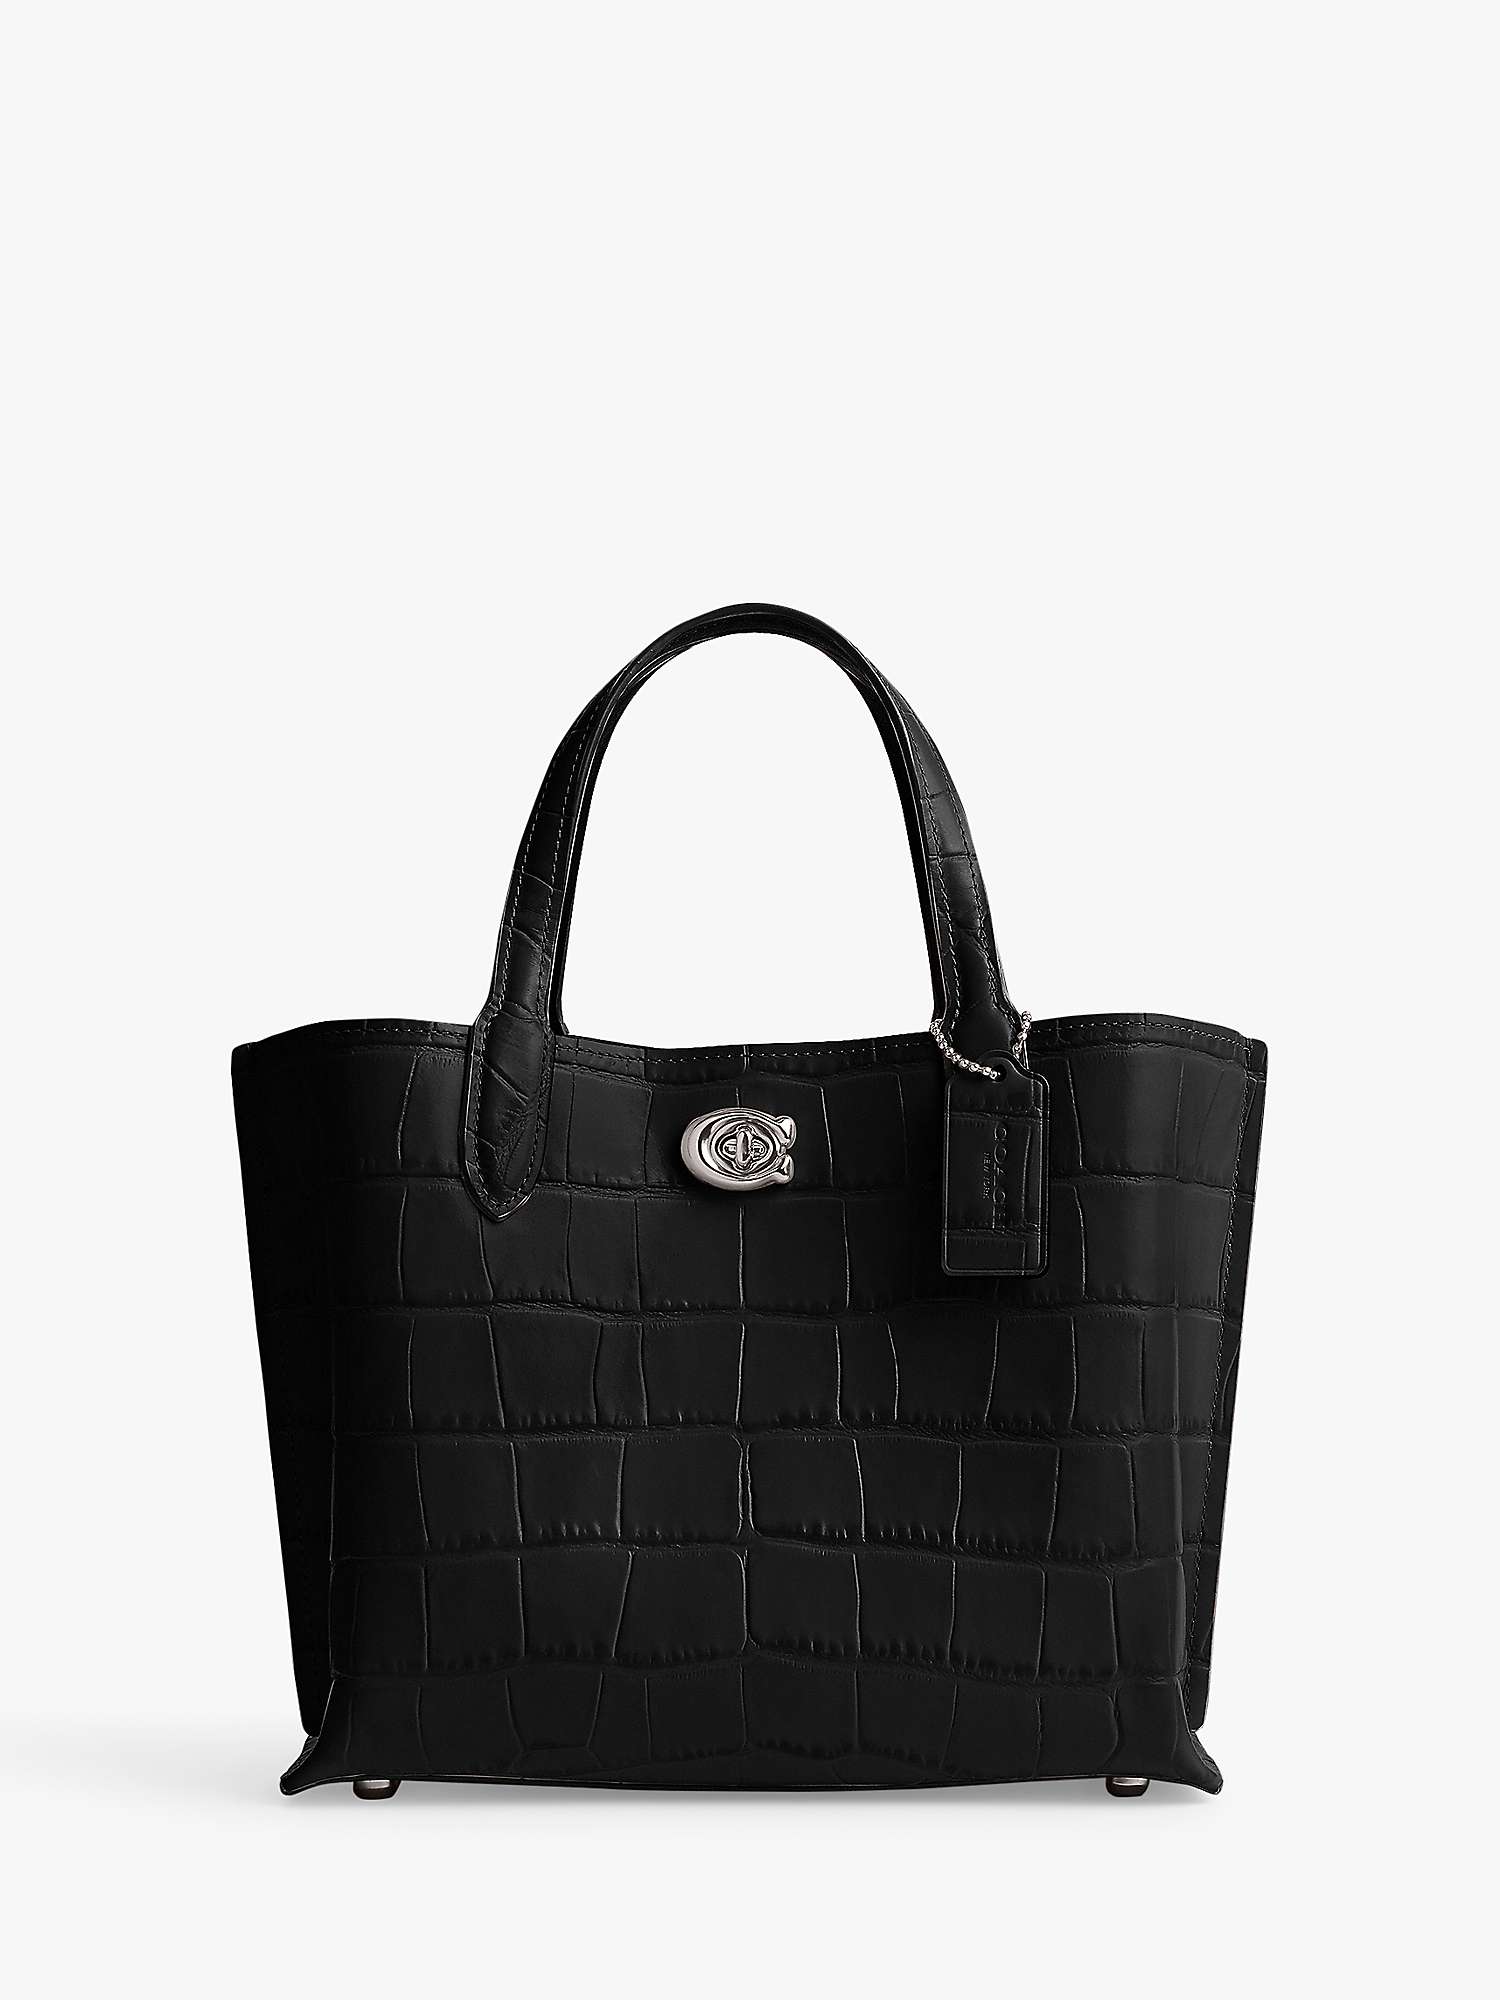 Buy Coach Willow 24 Leather Tote Bag Online at johnlewis.com